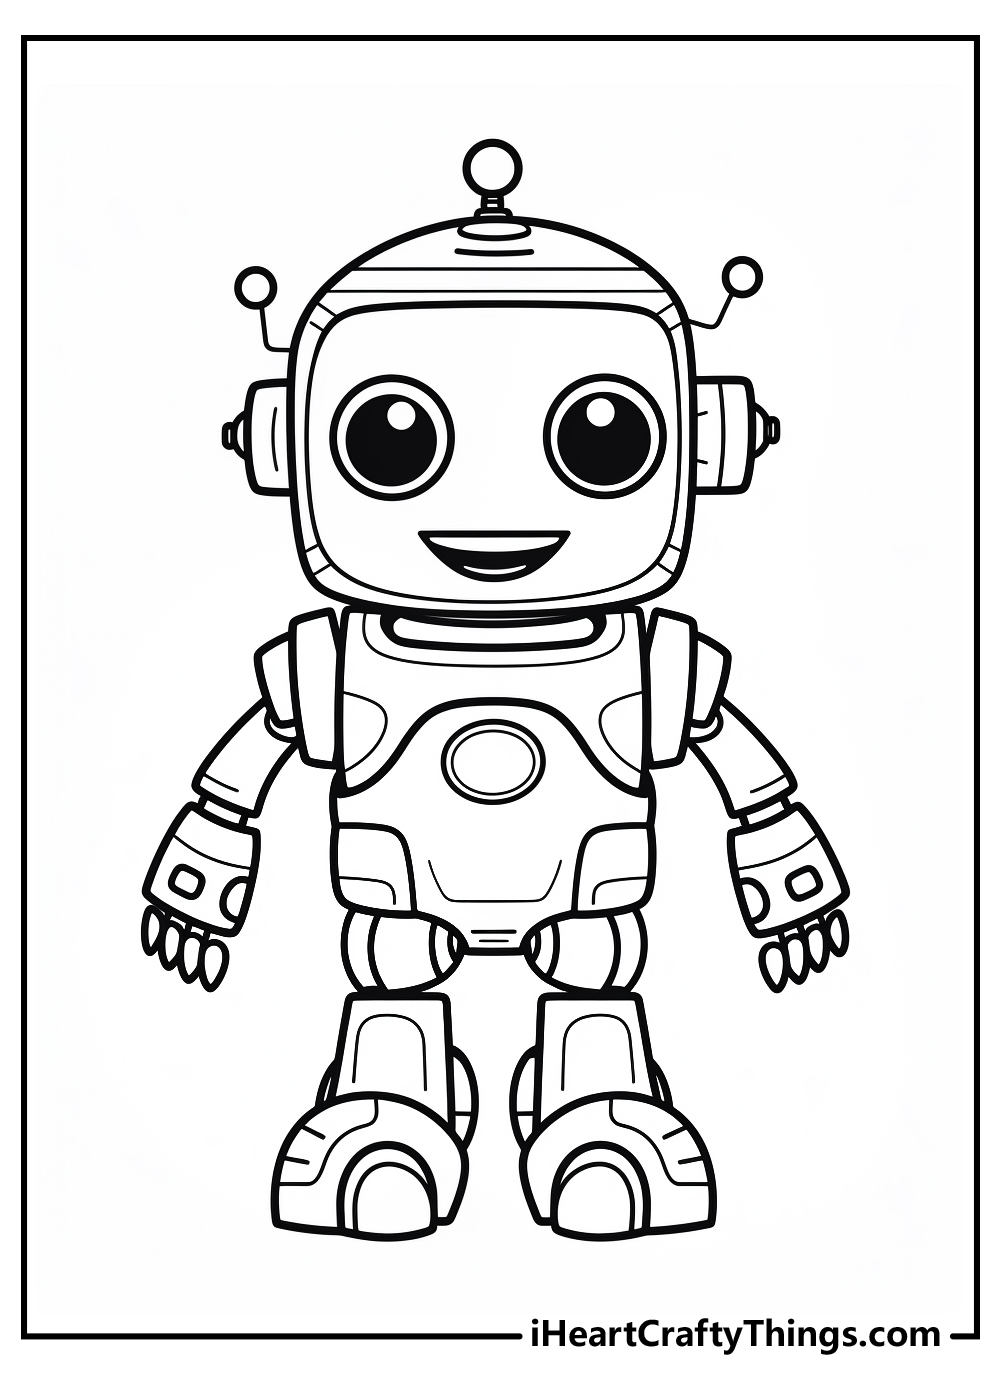 Fantastic Robot Coloring Book For Kids Ages 5-7: Explore, Fun With